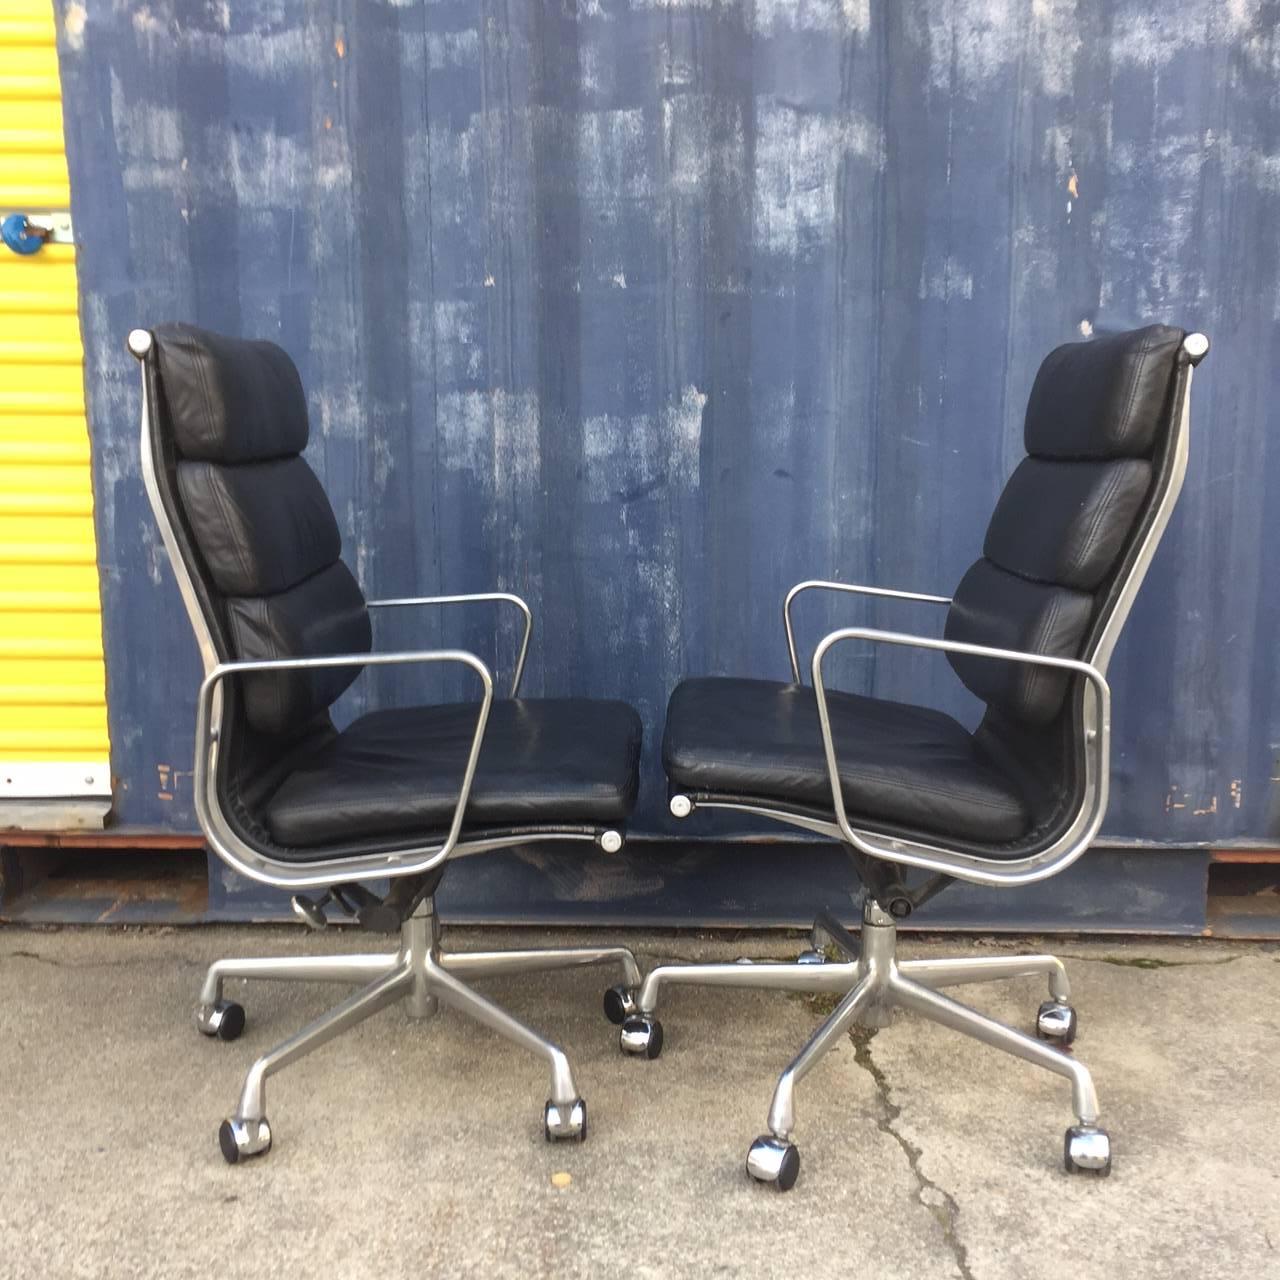 For your consideration are up to two Eames for Herman Miller soft pad chairs with high backs.

These chairs are icons of Mid-Century Modern design, and continue to be produced by Herman Miller to this day.

The black leather is soft and supple.